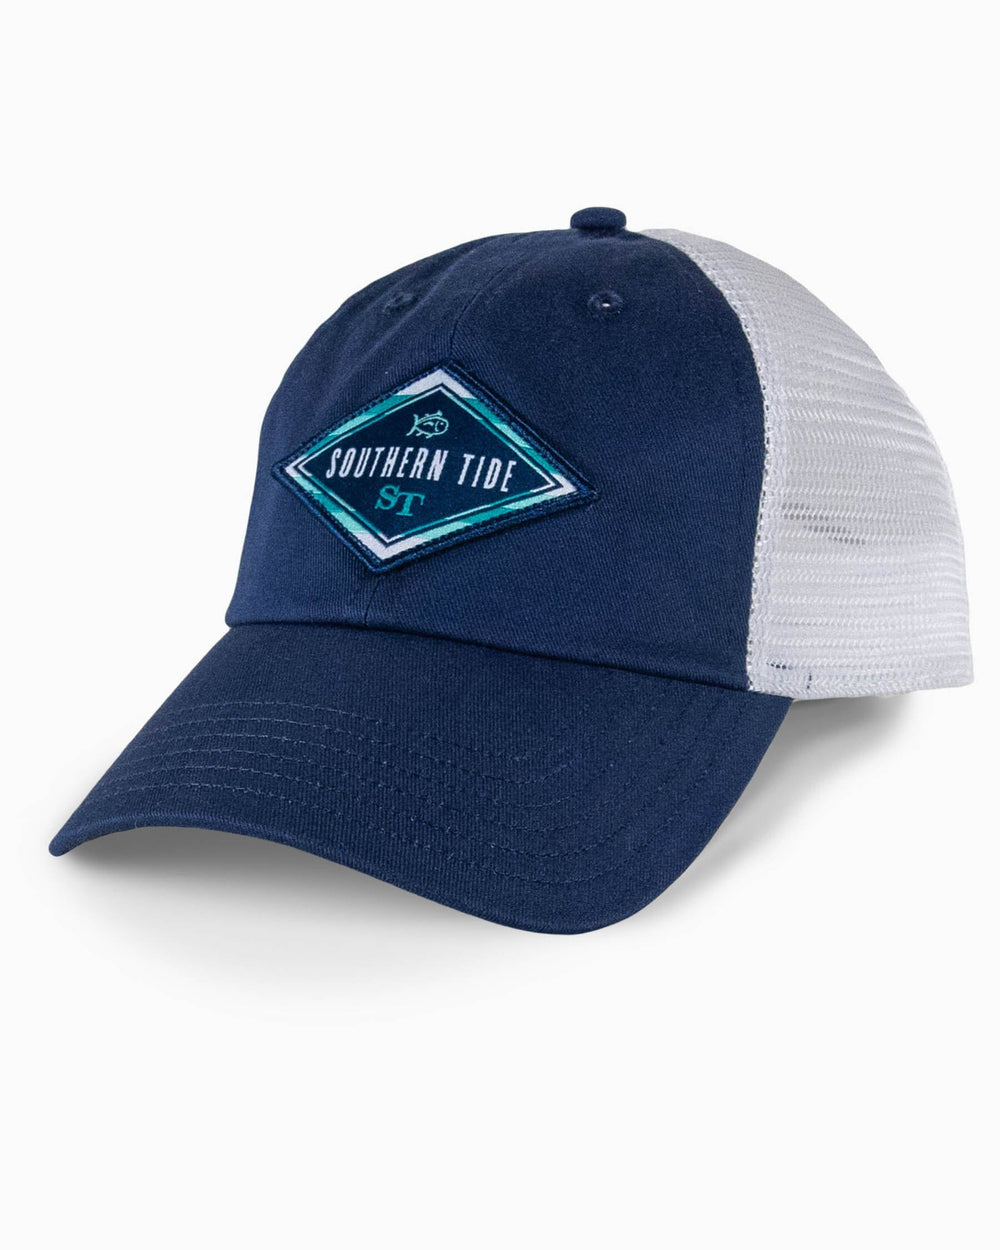 The front view of the Southern Tide Classic Stripe Trucker by Southern Tide - Navy